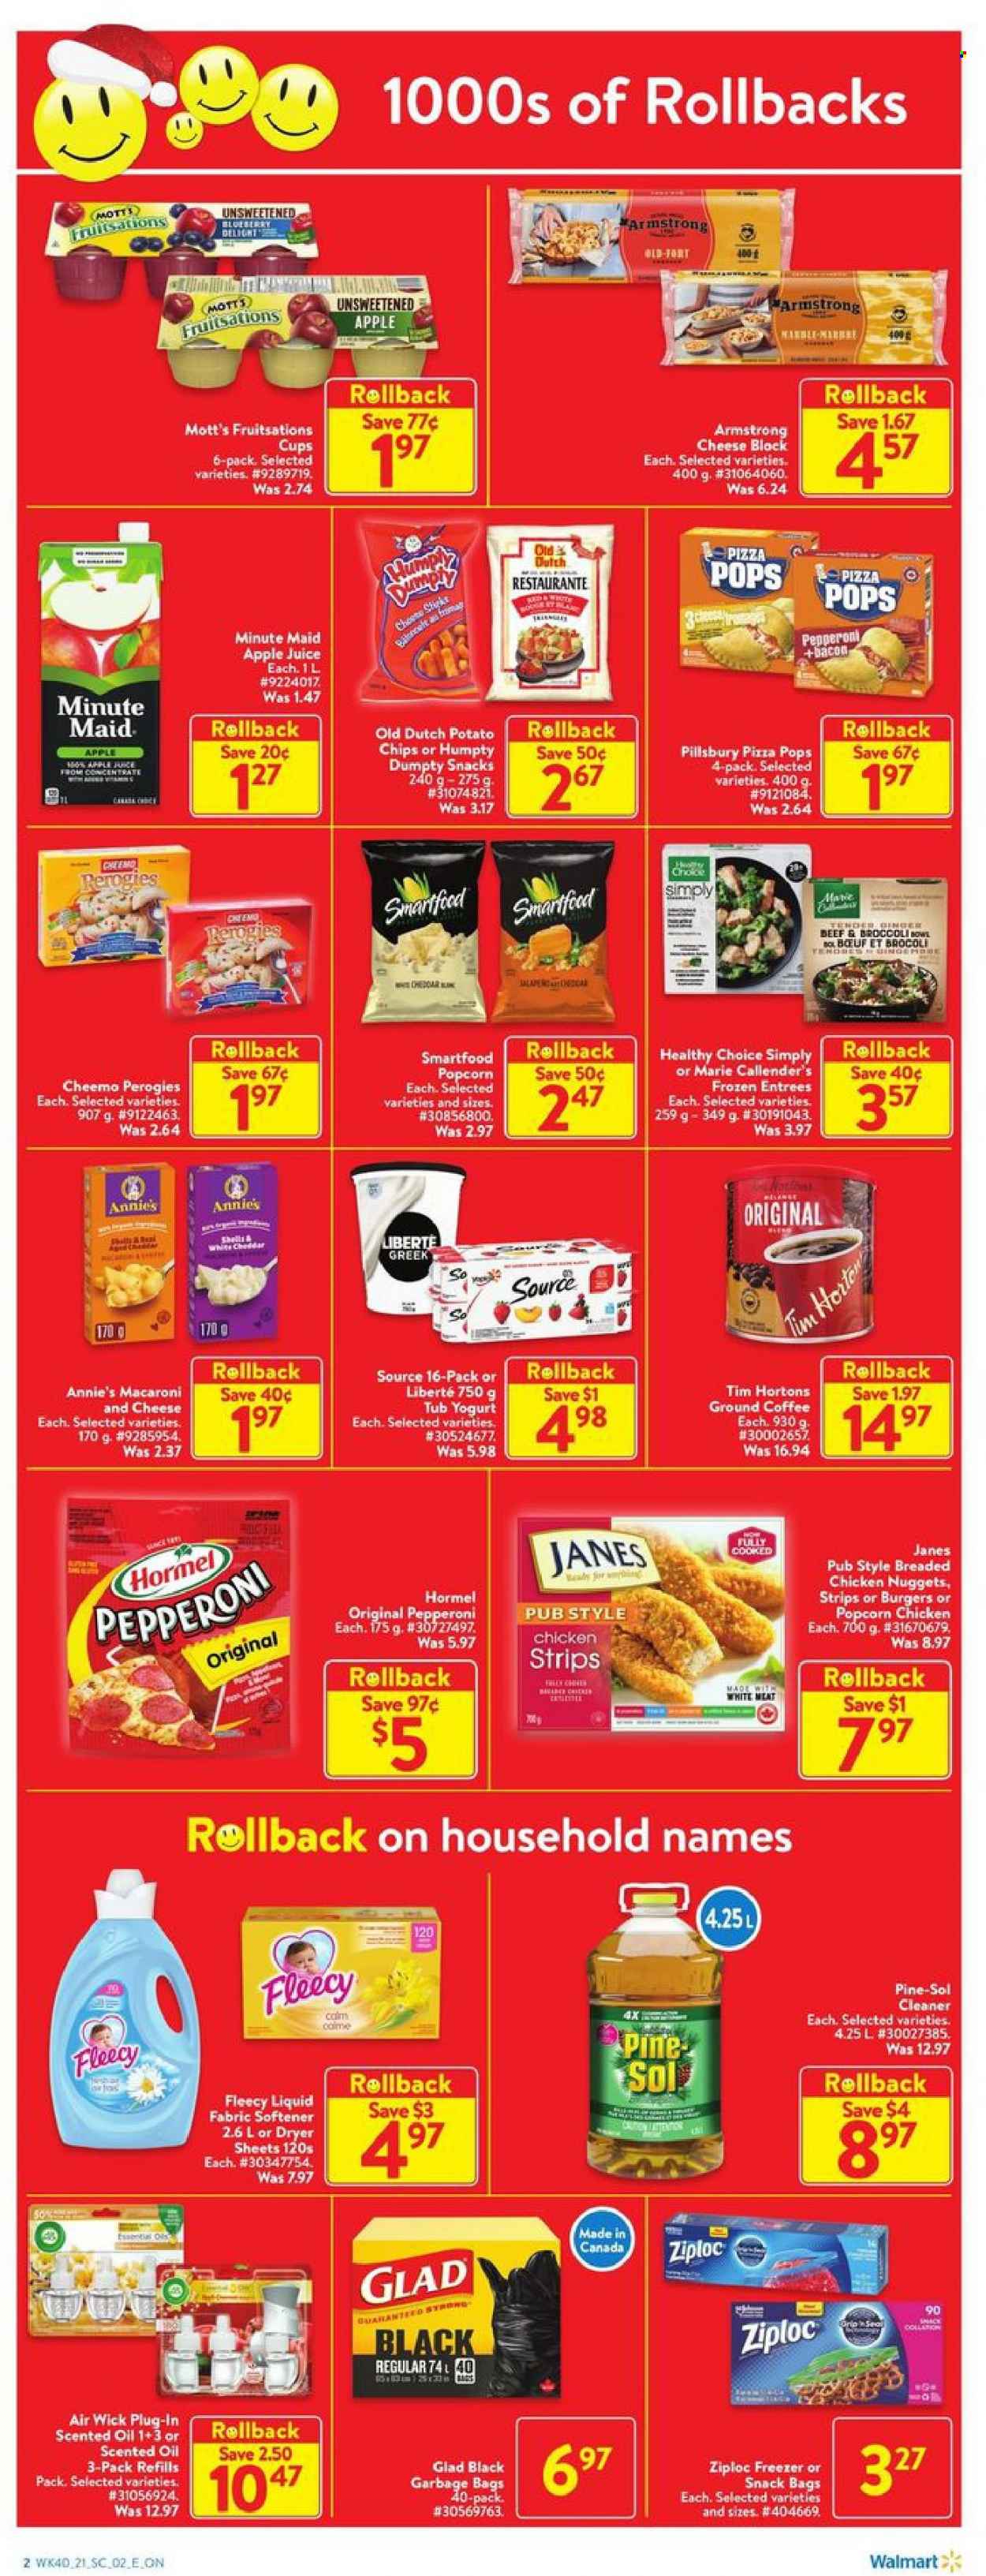 thumbnail - Walmart Flyer - October 28, 2021 - November 03, 2021 - Sales products - broccoli, Mott's, macaroni & cheese, pizza, nuggets, fried chicken, Pillsbury, chicken nuggets, Healthy Choice, Marie Callender's, Annie's, Hormel, bacon, pepperoni, yoghurt, strips, potato chips, Smartfood, popcorn, oil, apple juice, juice, fruit punch, coffee, ground coffee, cleaner, Pine-Sol, fabric softener, dryer sheets, bag, Ziploc, cup, Air Wick, scented oil, freezer, Shell. Page 2.